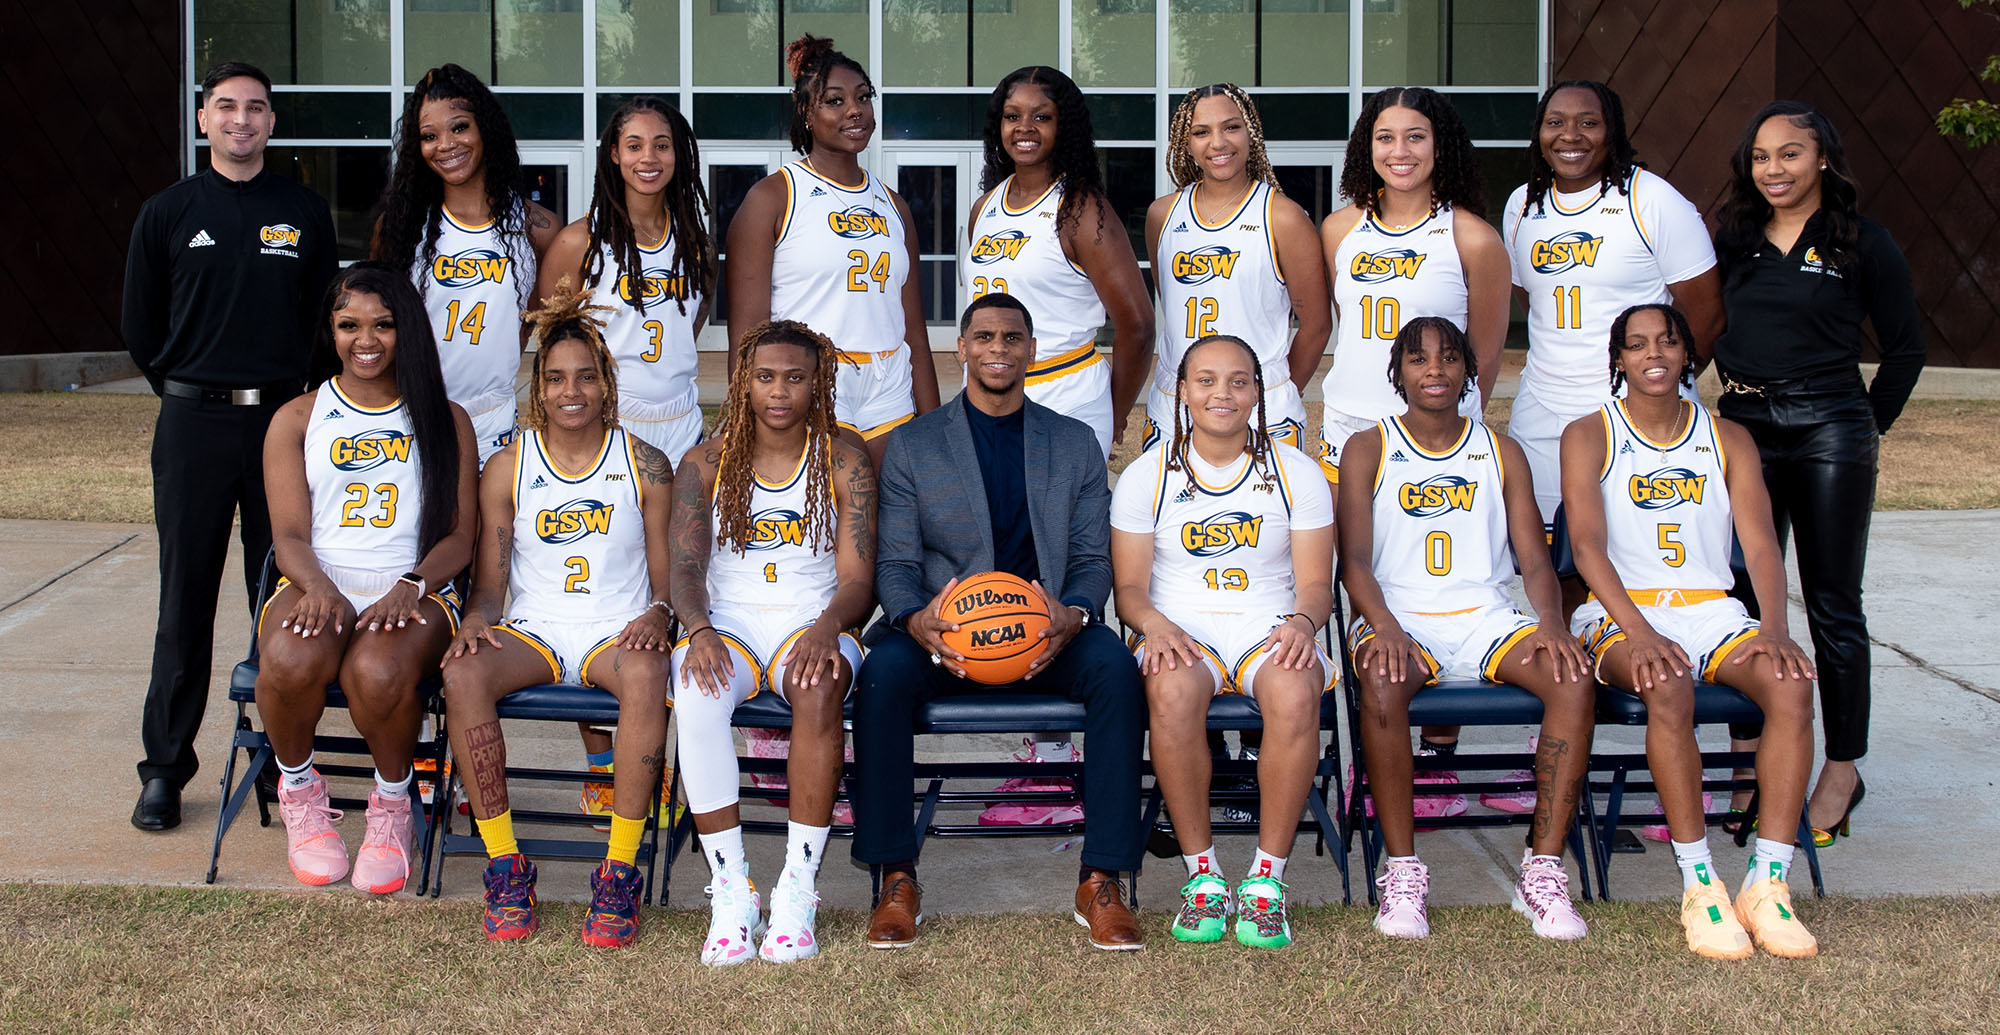 Lady Hurricanes Ranked #14 in WBCA Poll